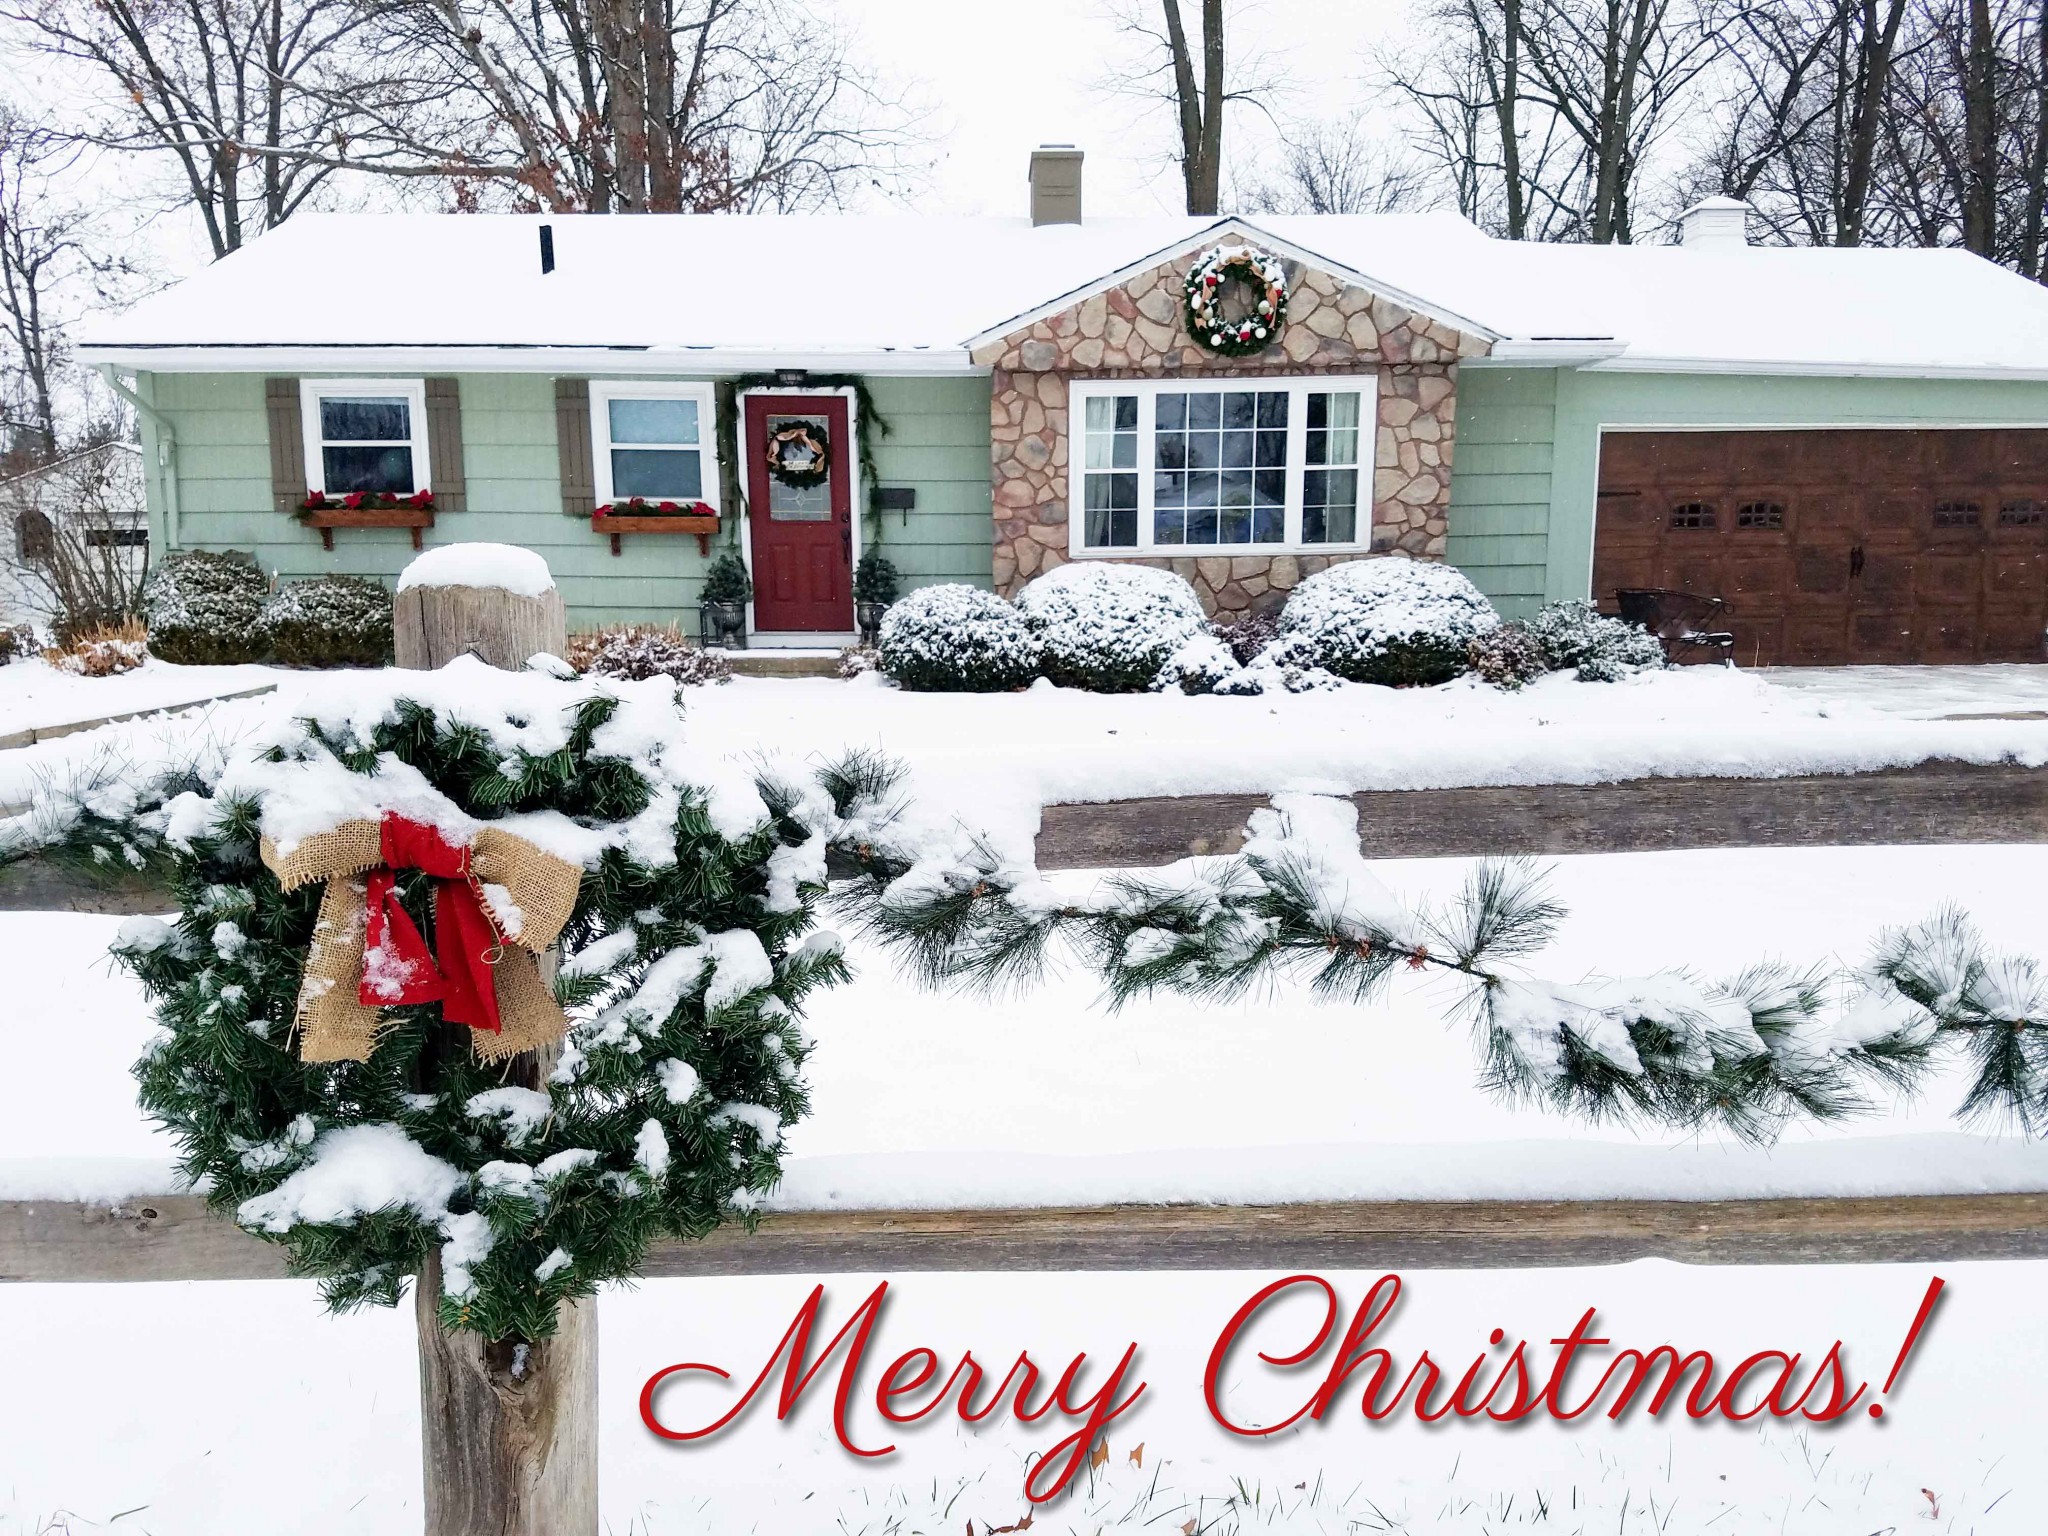 Merry Christmas Wish from Larissa and Family at Prodigal Pieces | prodigalpieces.com